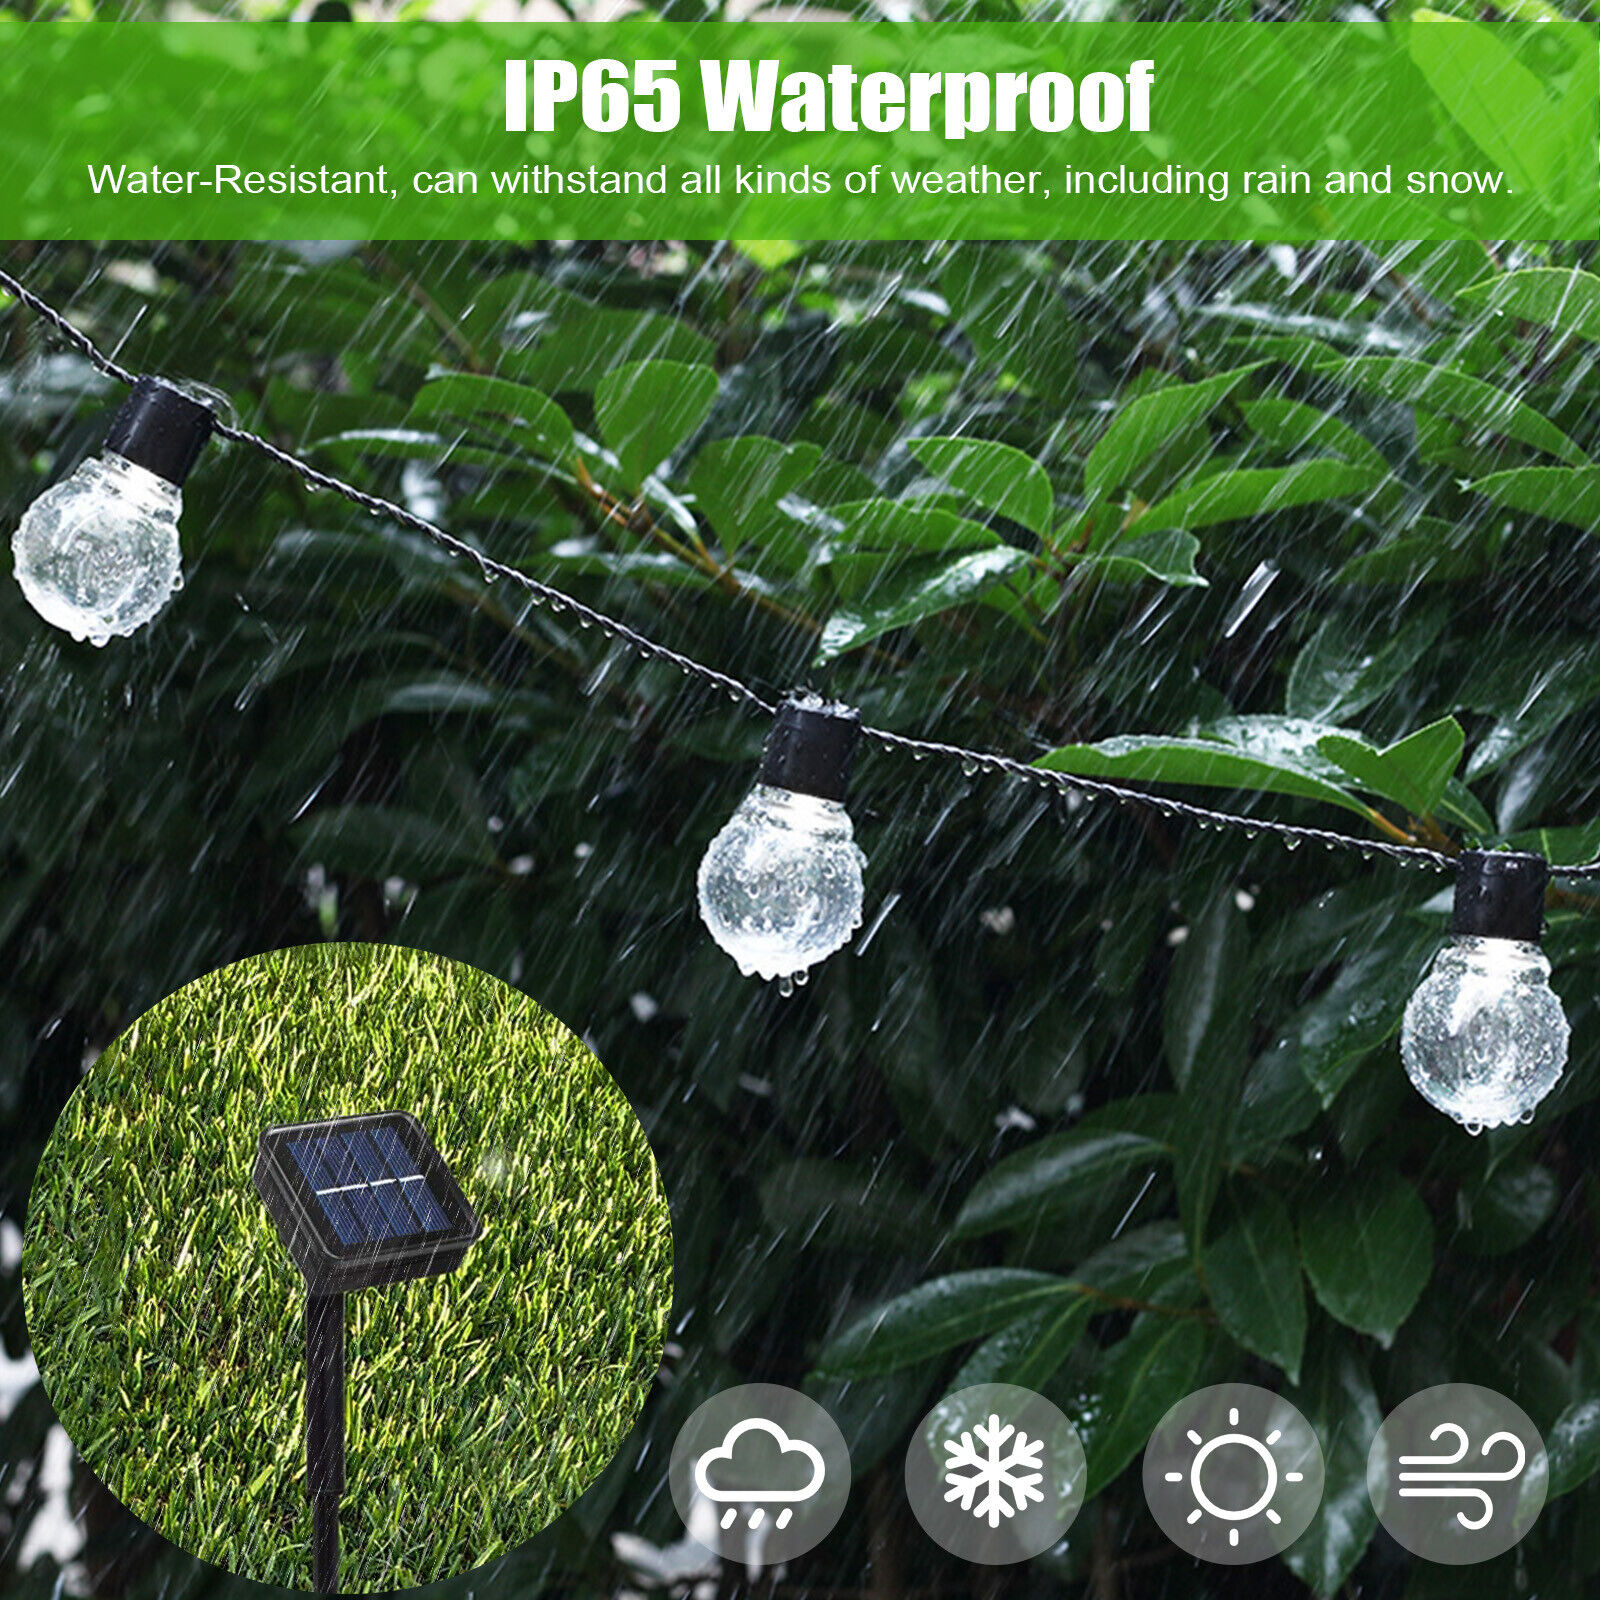 LED-Ceiling-Lights-Solar-Outdoor-Light-String-5M-20LED-Bulb-LED-Transparent-Ball-Night-Light-IP55-Waterproof-Camping-Atmosphere-Tent-Light-Christmas-Day-Decoration-Light-14